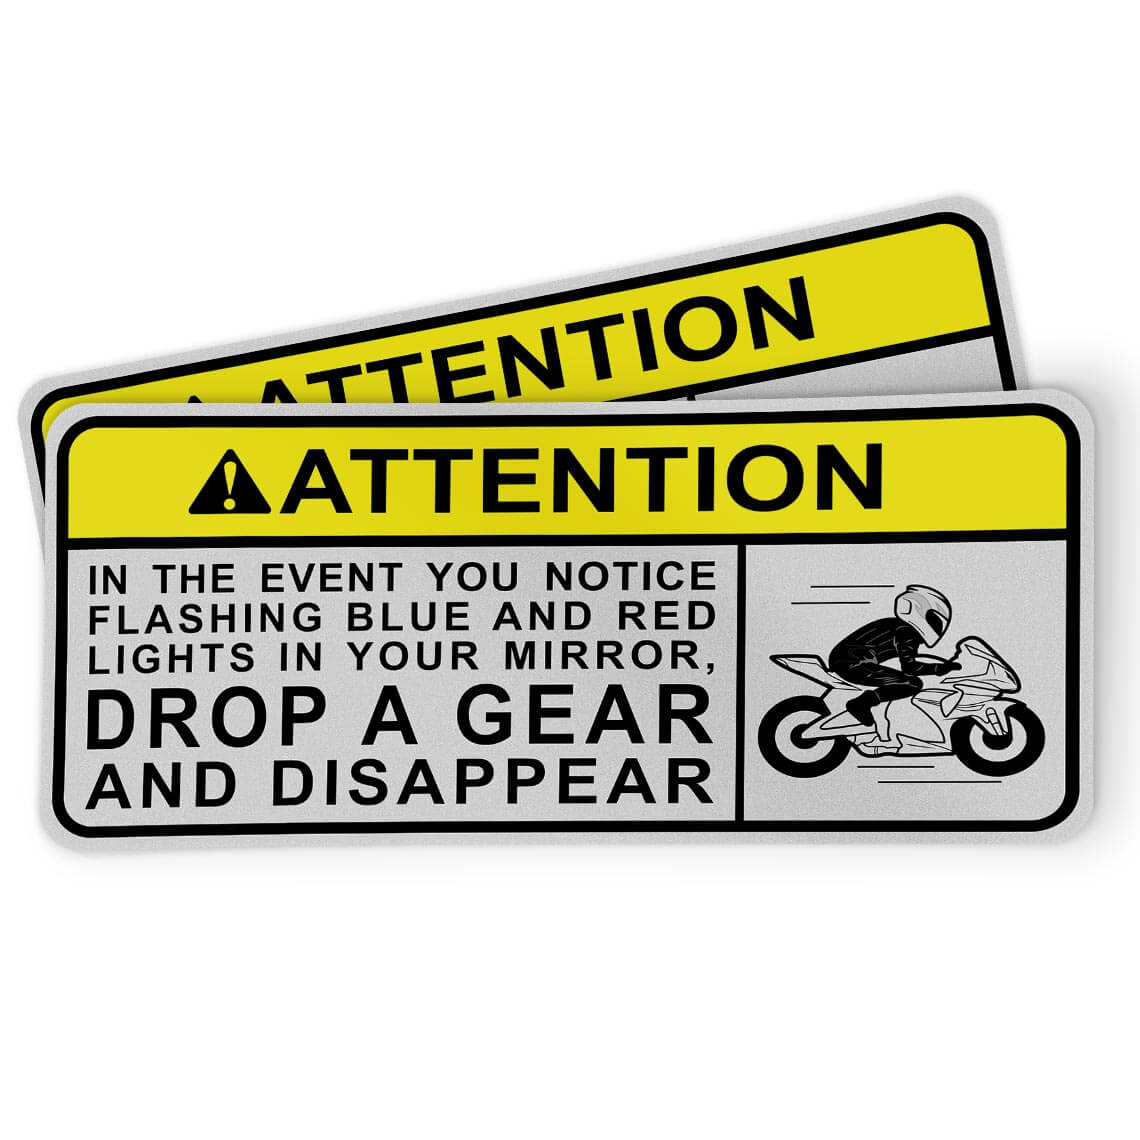 Funny Motorcycle Sticker - In the event you notice flashing blue and red lights in your mirror, drop a gear and disappearAttention - In the event you notice flashing blue and red lights in your mirror, drop a gear and disappear